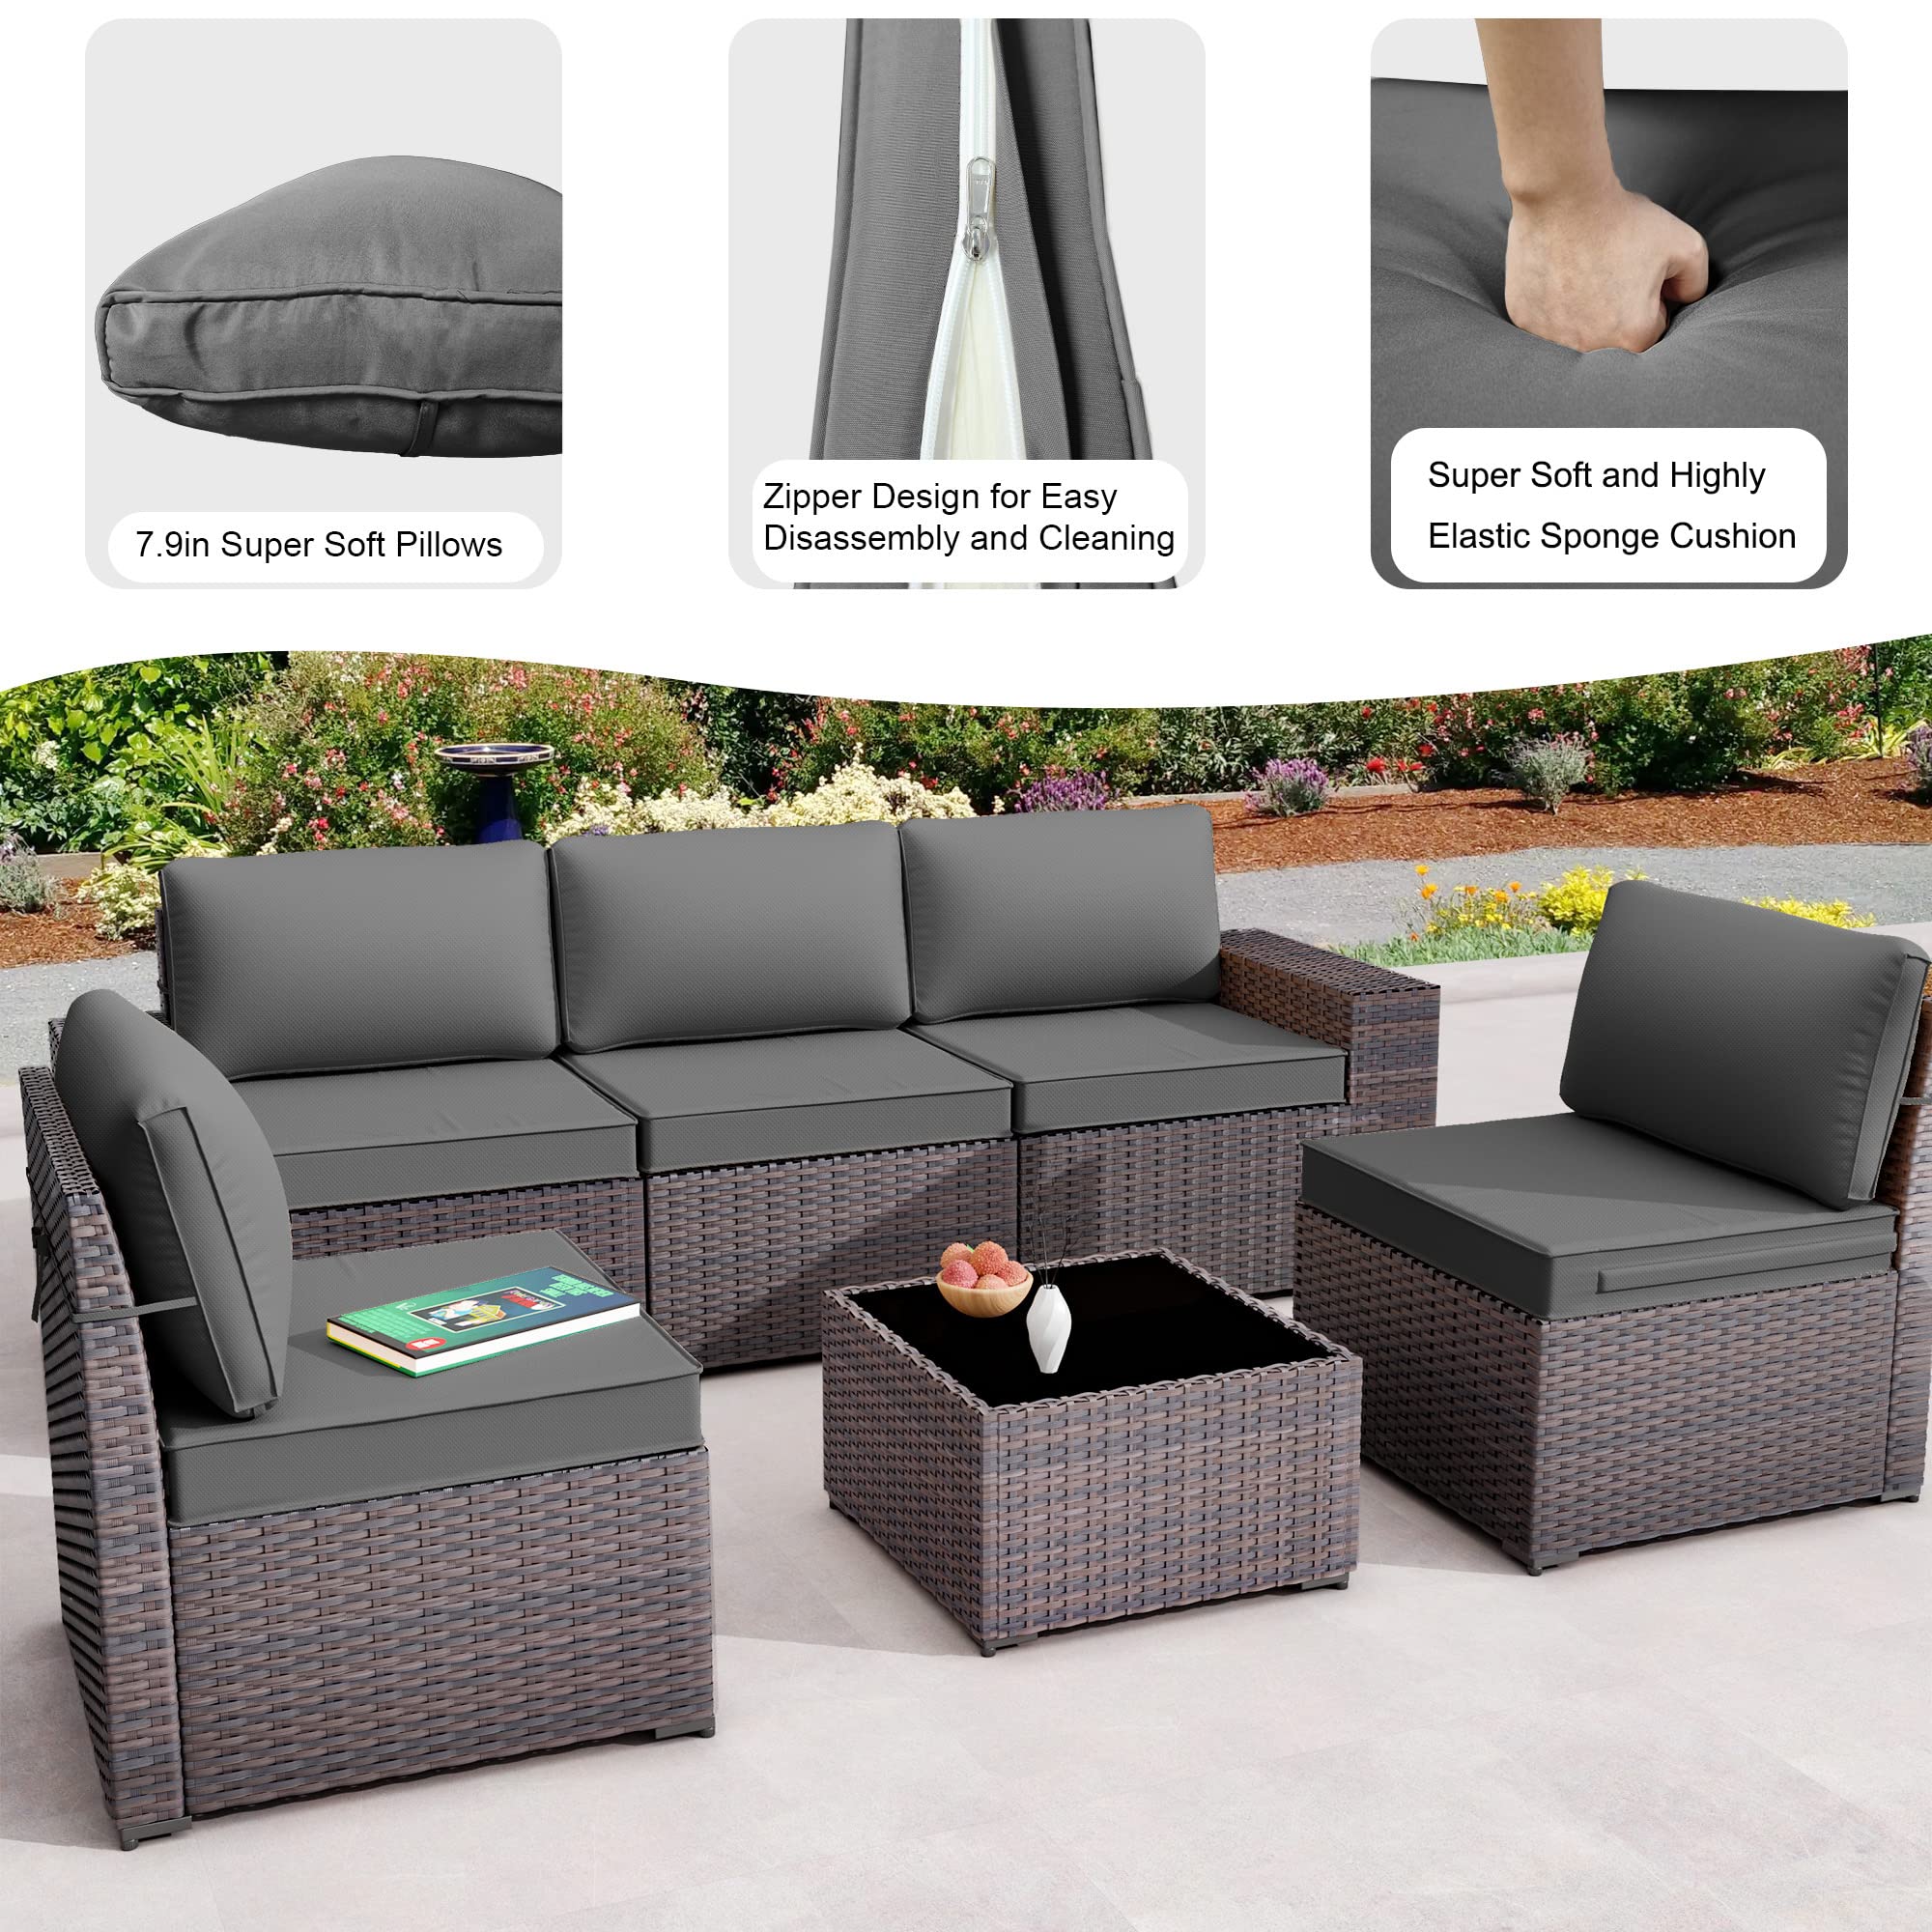 Piltwoff 6 Pieces Waterproof Outdoor Patio Set, Modern All-Weather Outdoor Patio Furniture Sets with 5 Black&Brown Chairs. Outdoor Sectional Sofa for Garden/Backyard/Balcony(Grey)